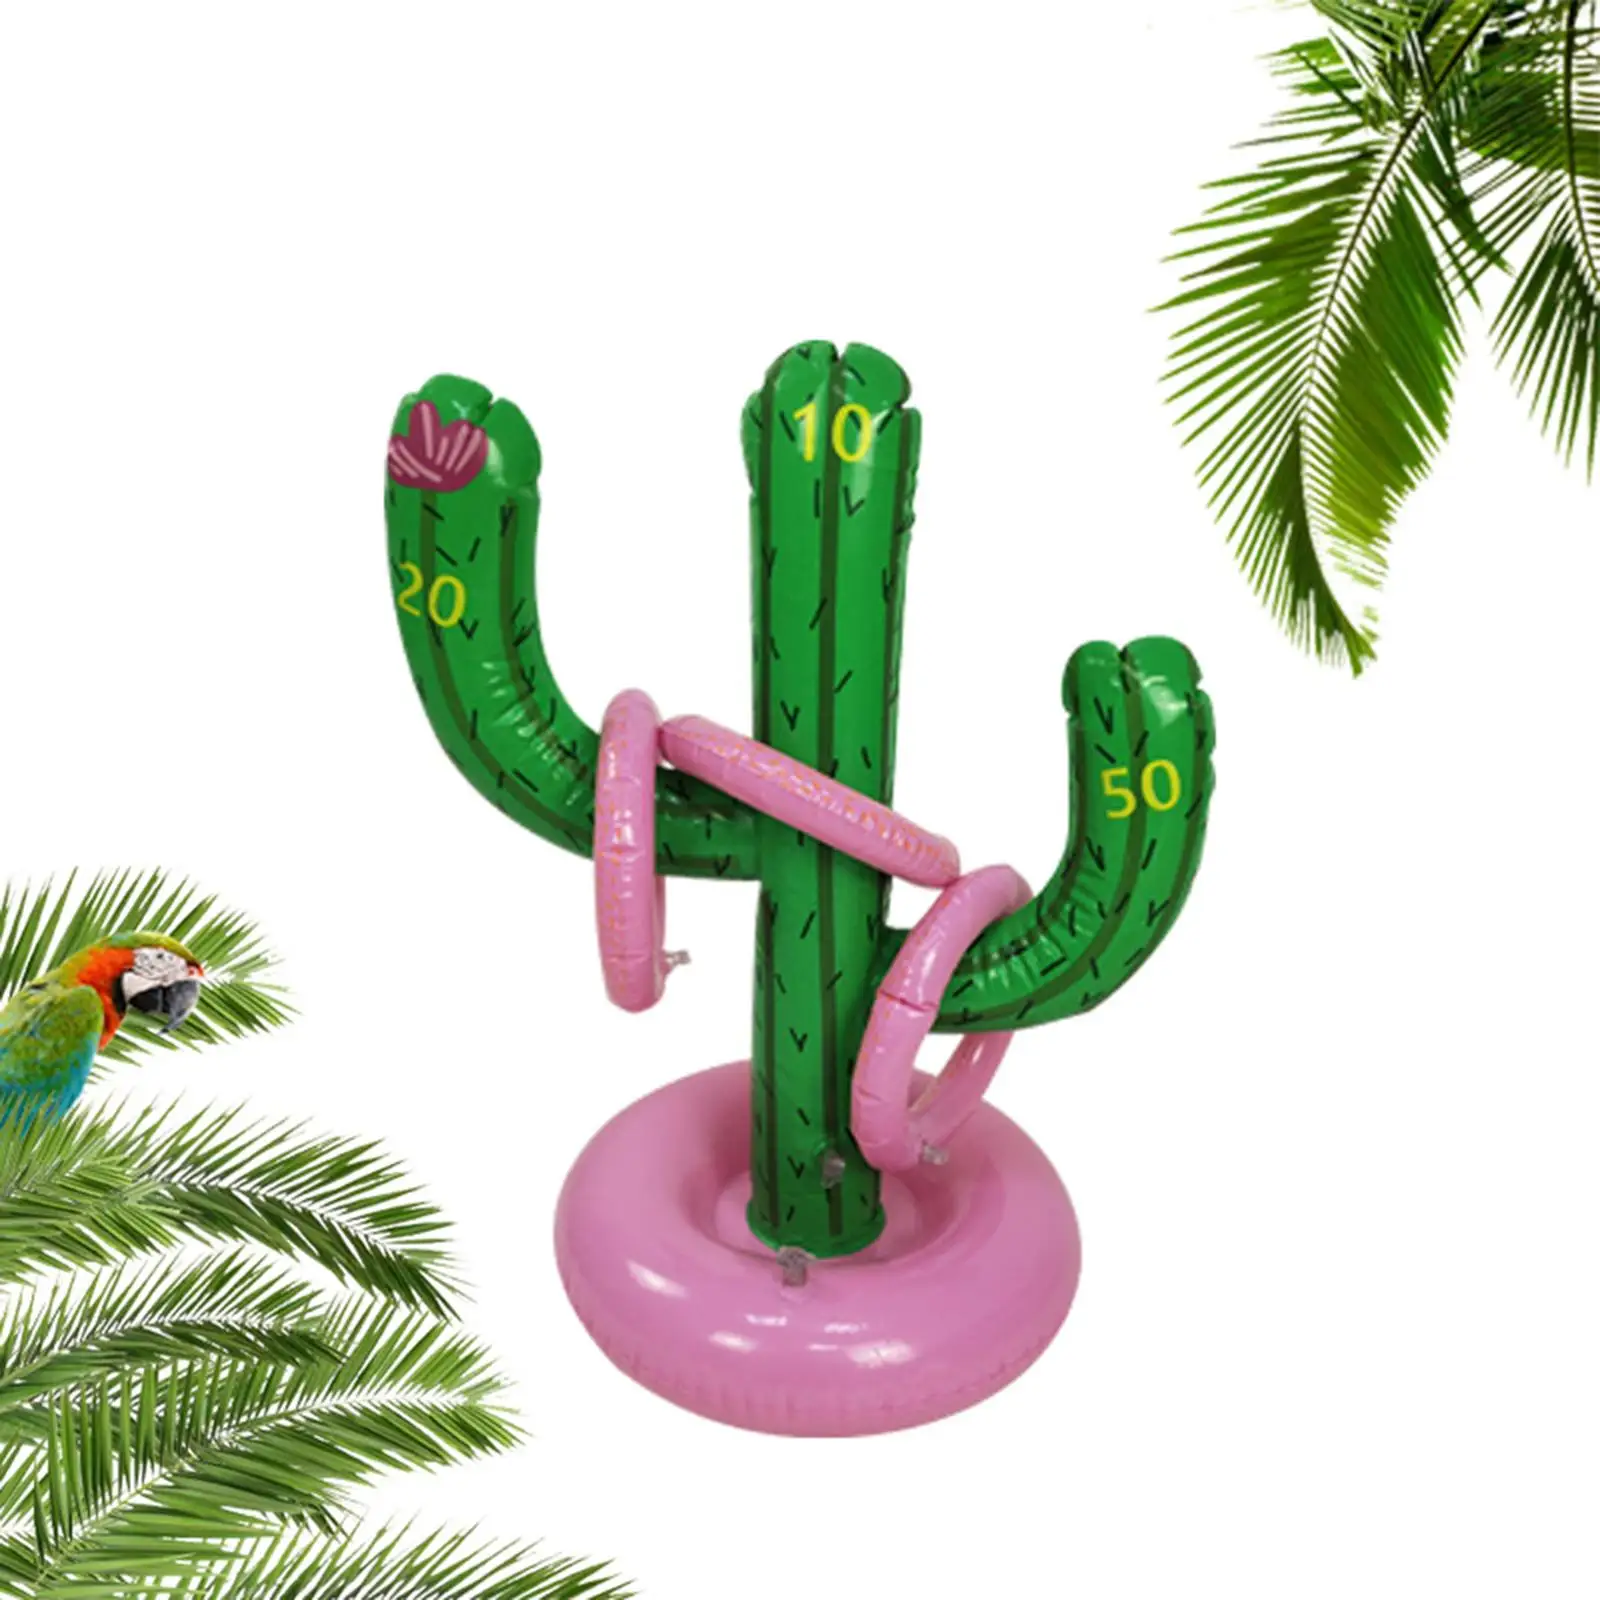 Inflatable Cactus Rings Toss Interactive Pool Toys for Leisure Teamwork